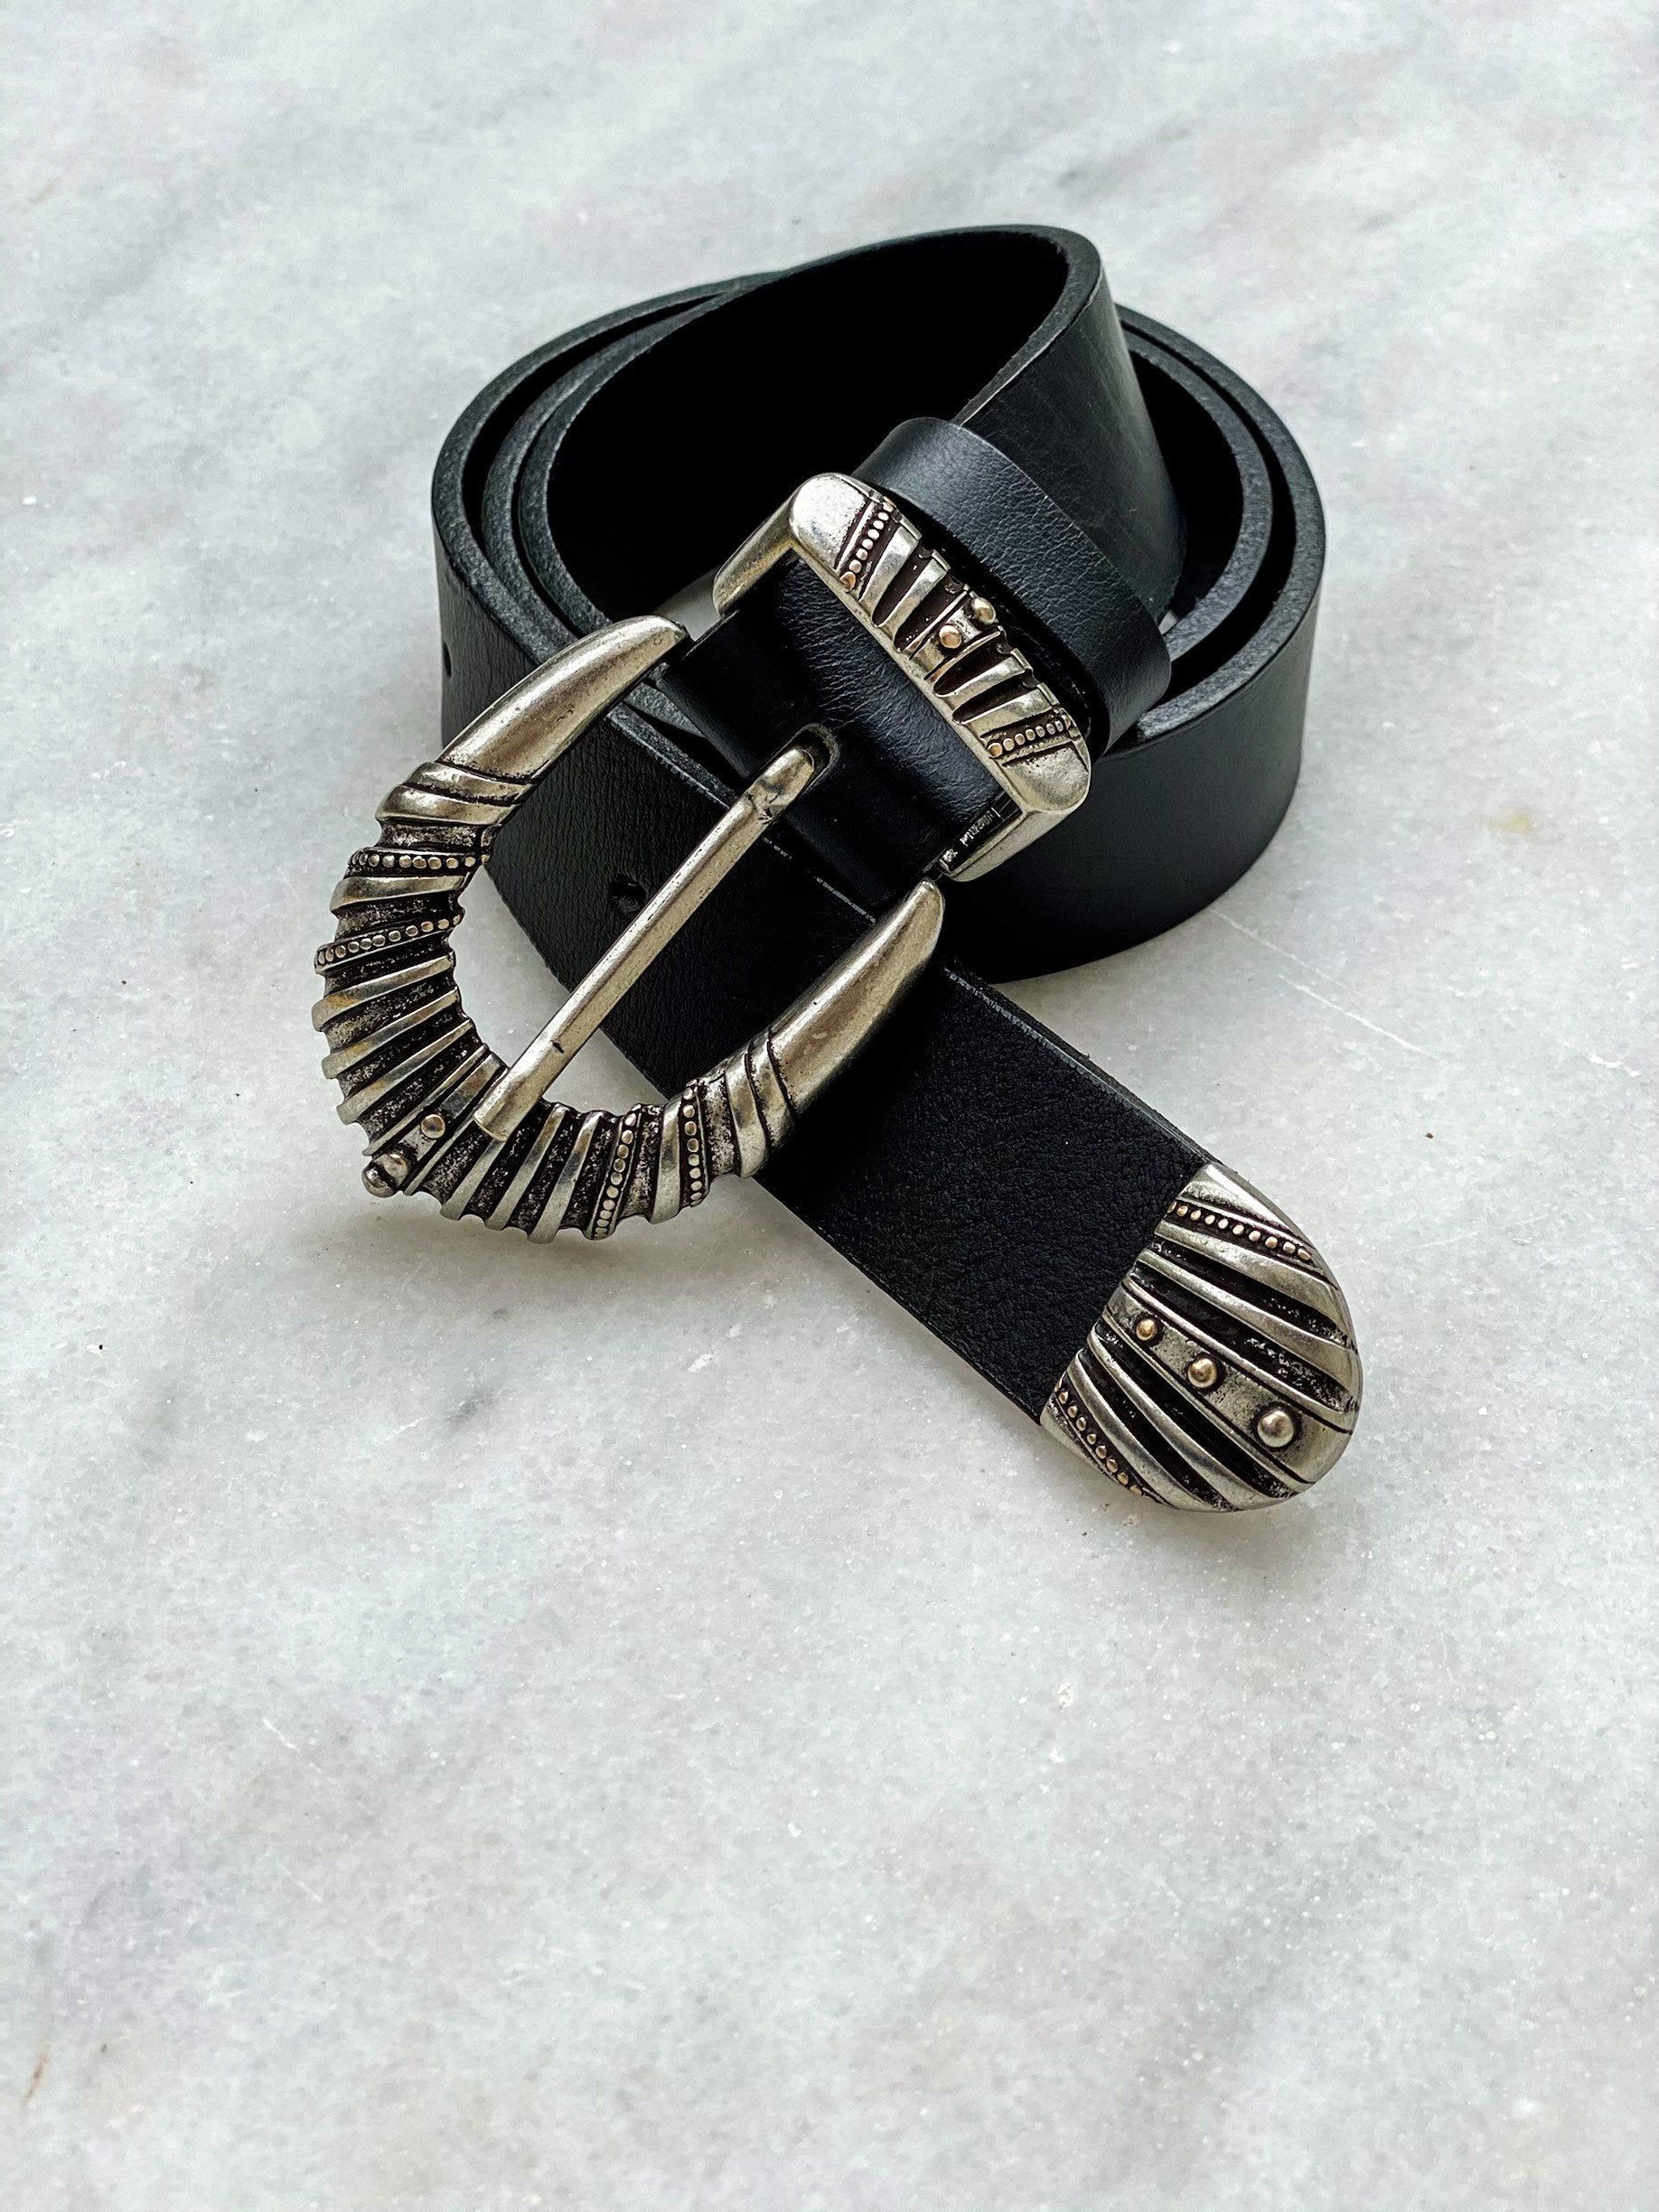 Silver Belts: Adding Shine and Sophistication to Your Outfit